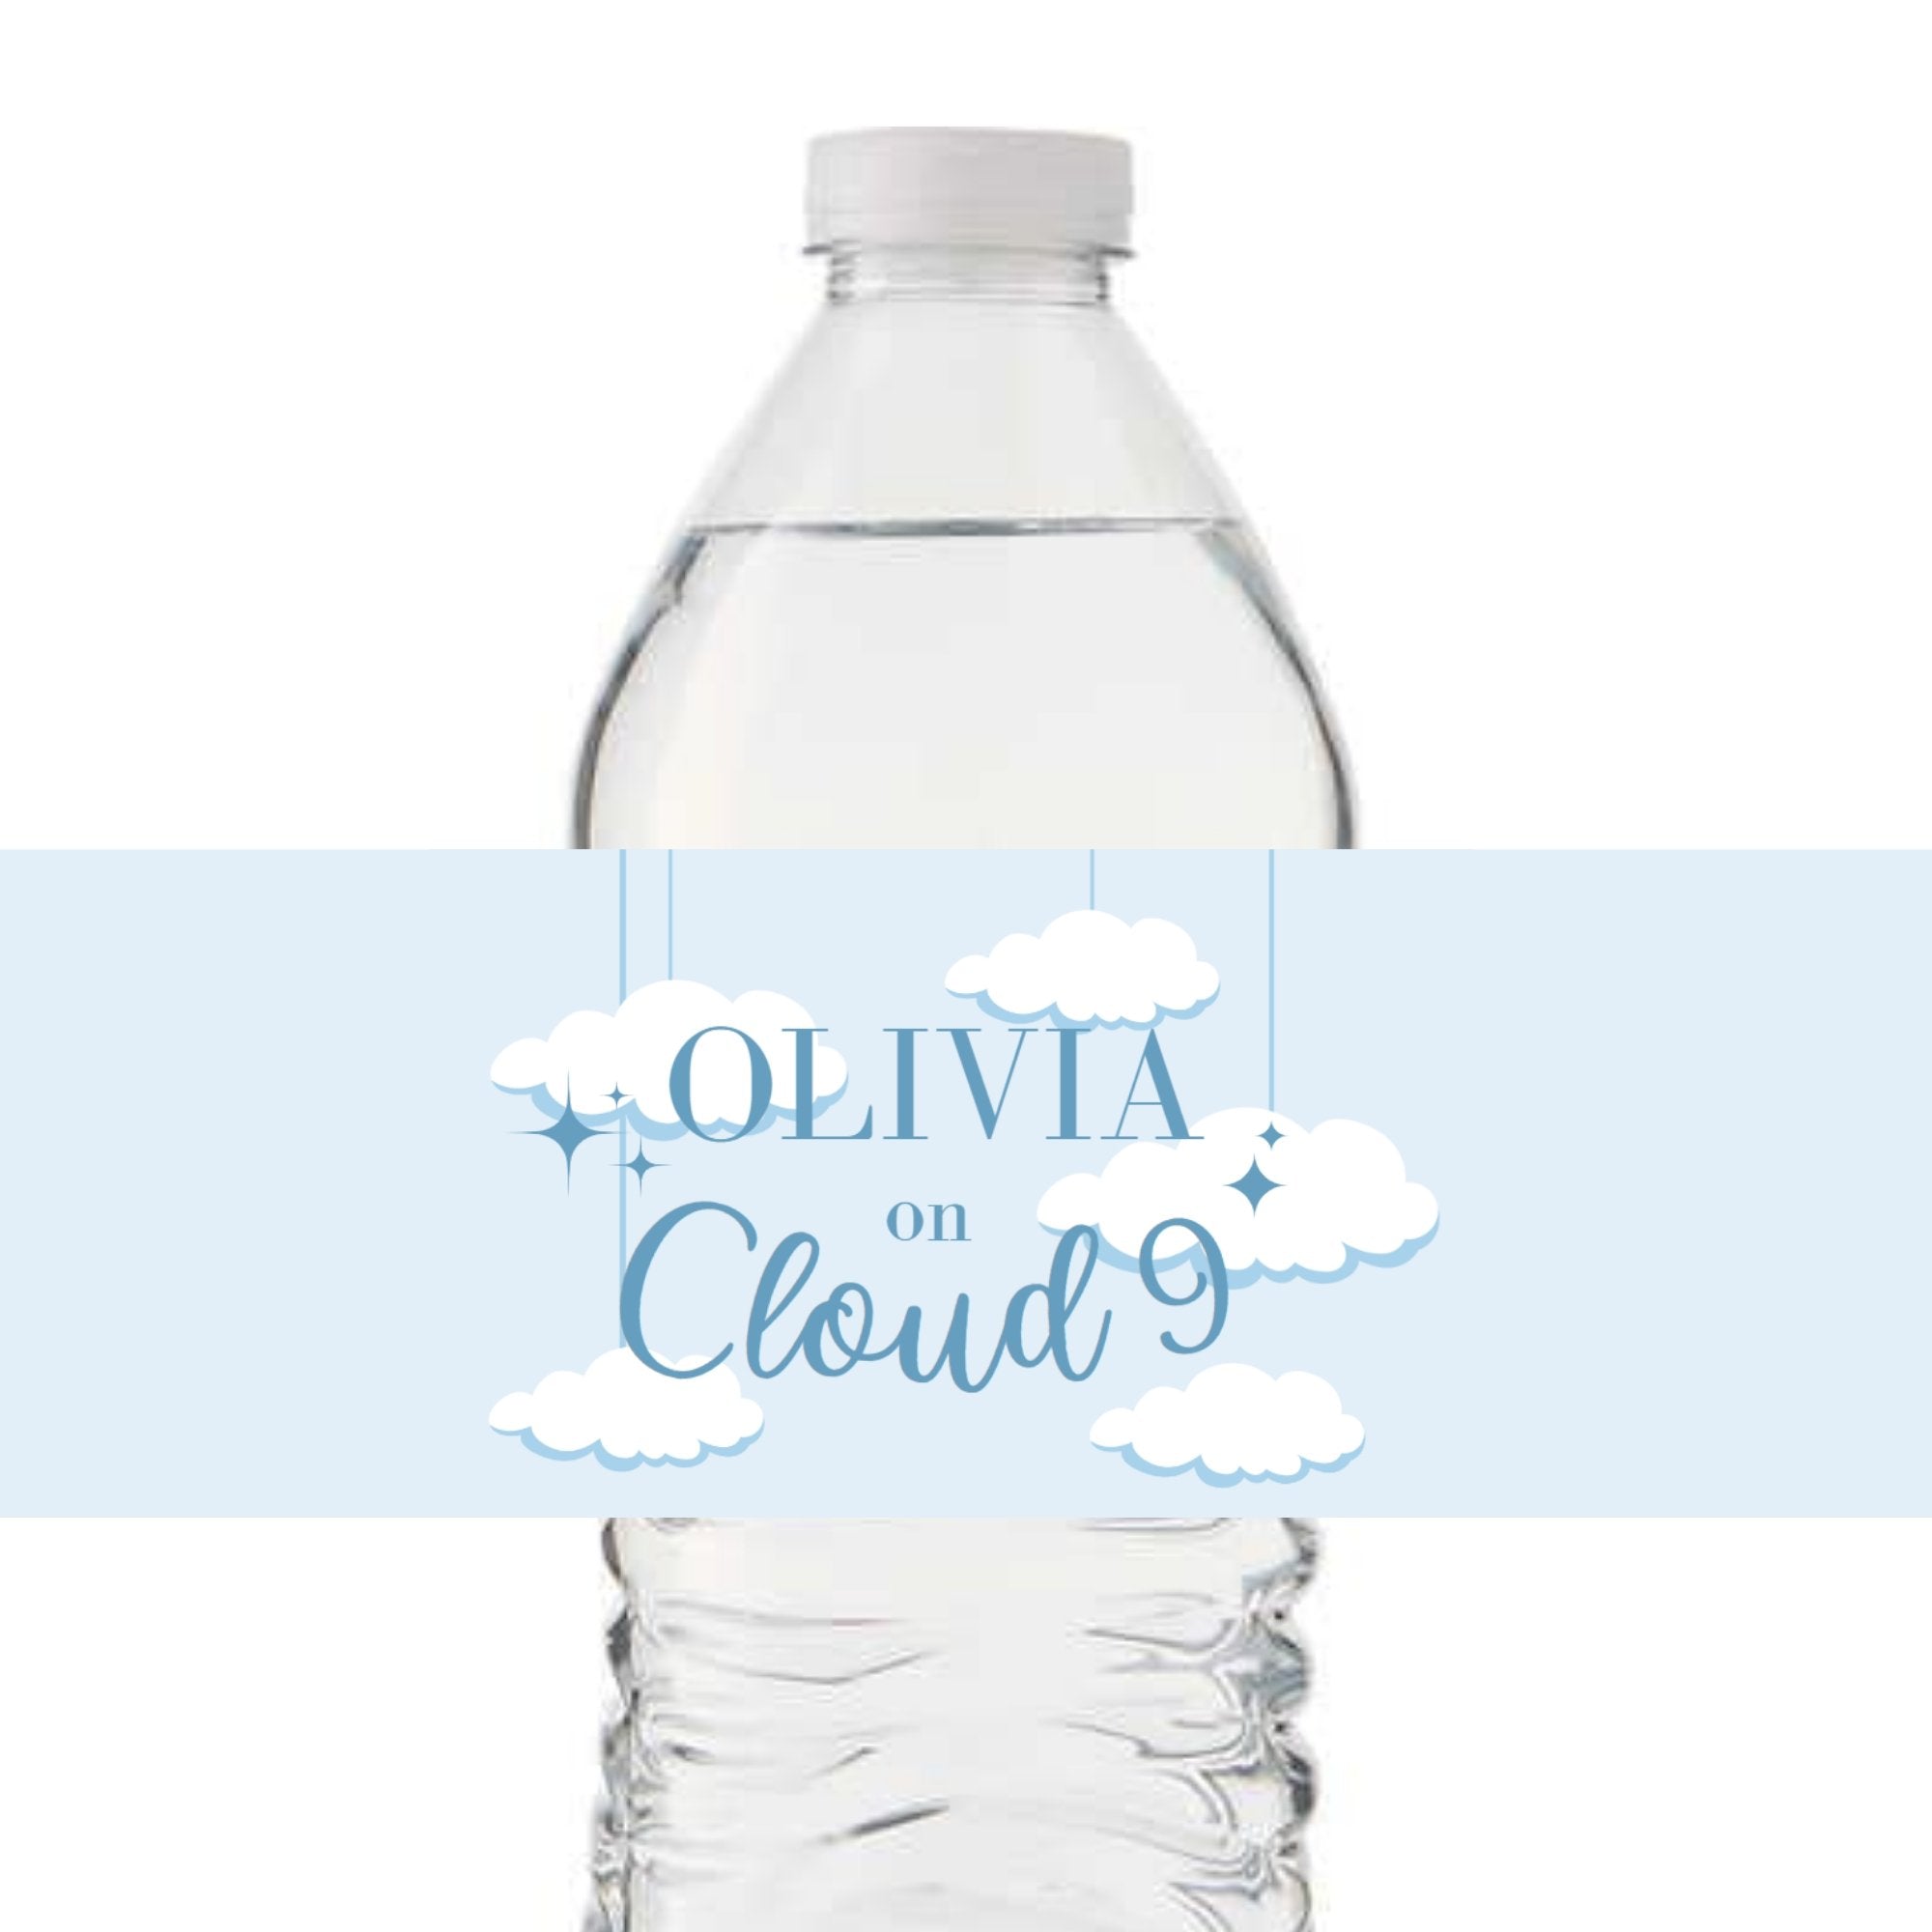 Custom Cloud 9 Water Bottle Label (Set of 10) - Sprinkled With Pink #bachelorette #custom #gifts